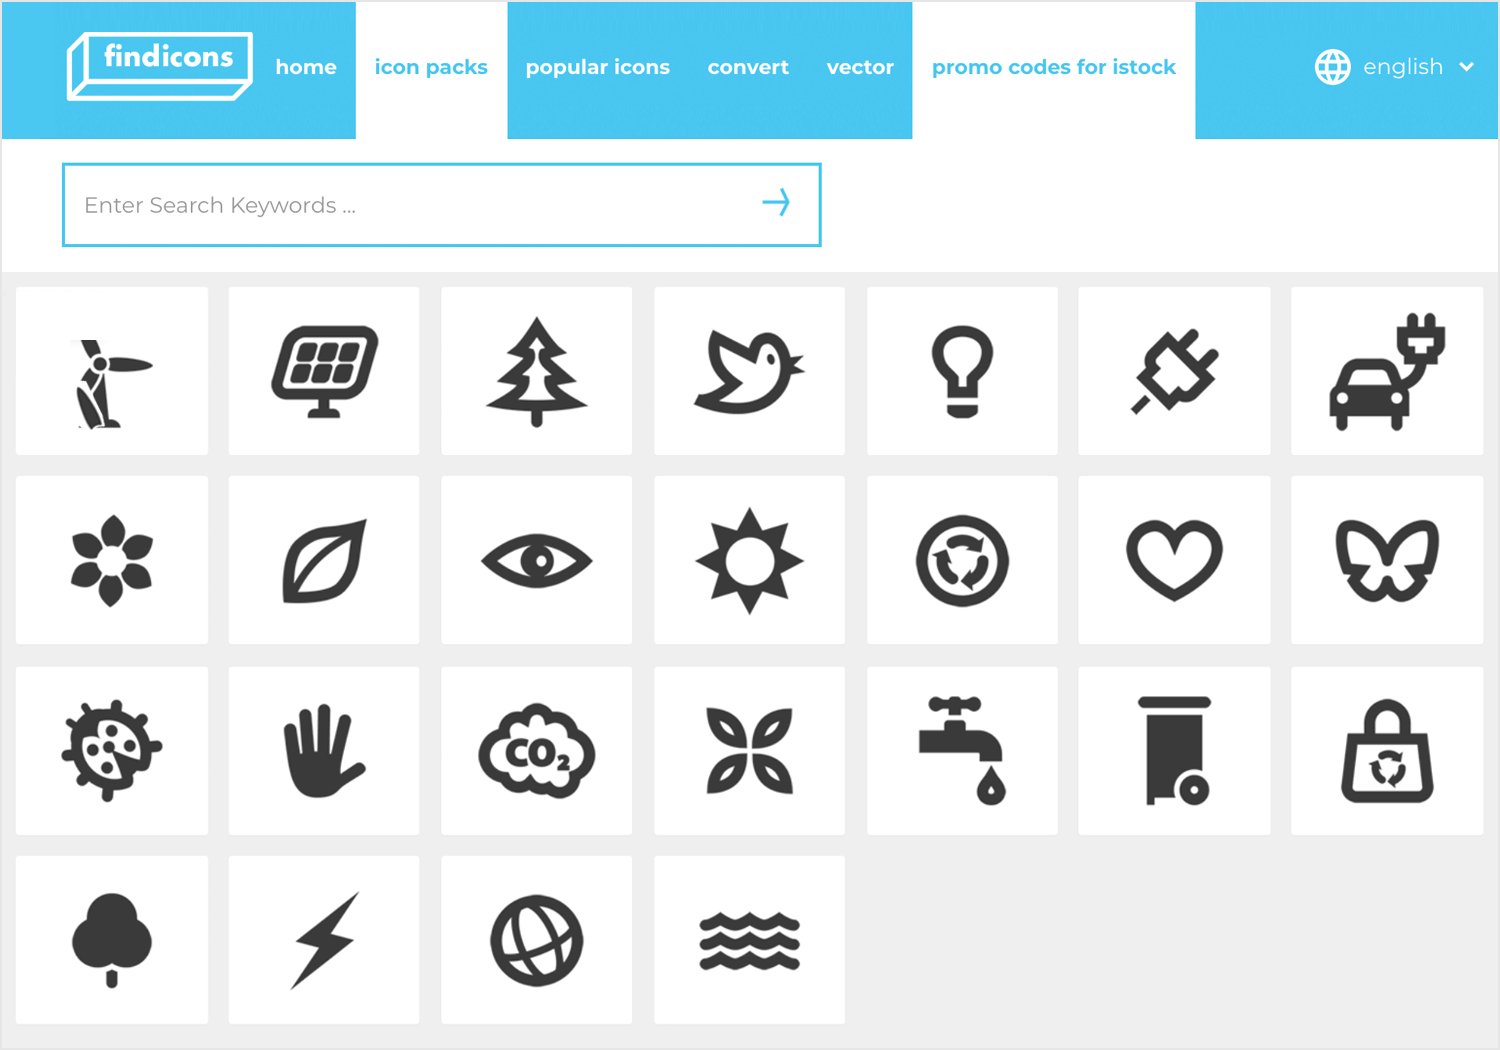 Free app icons to download - Findicons